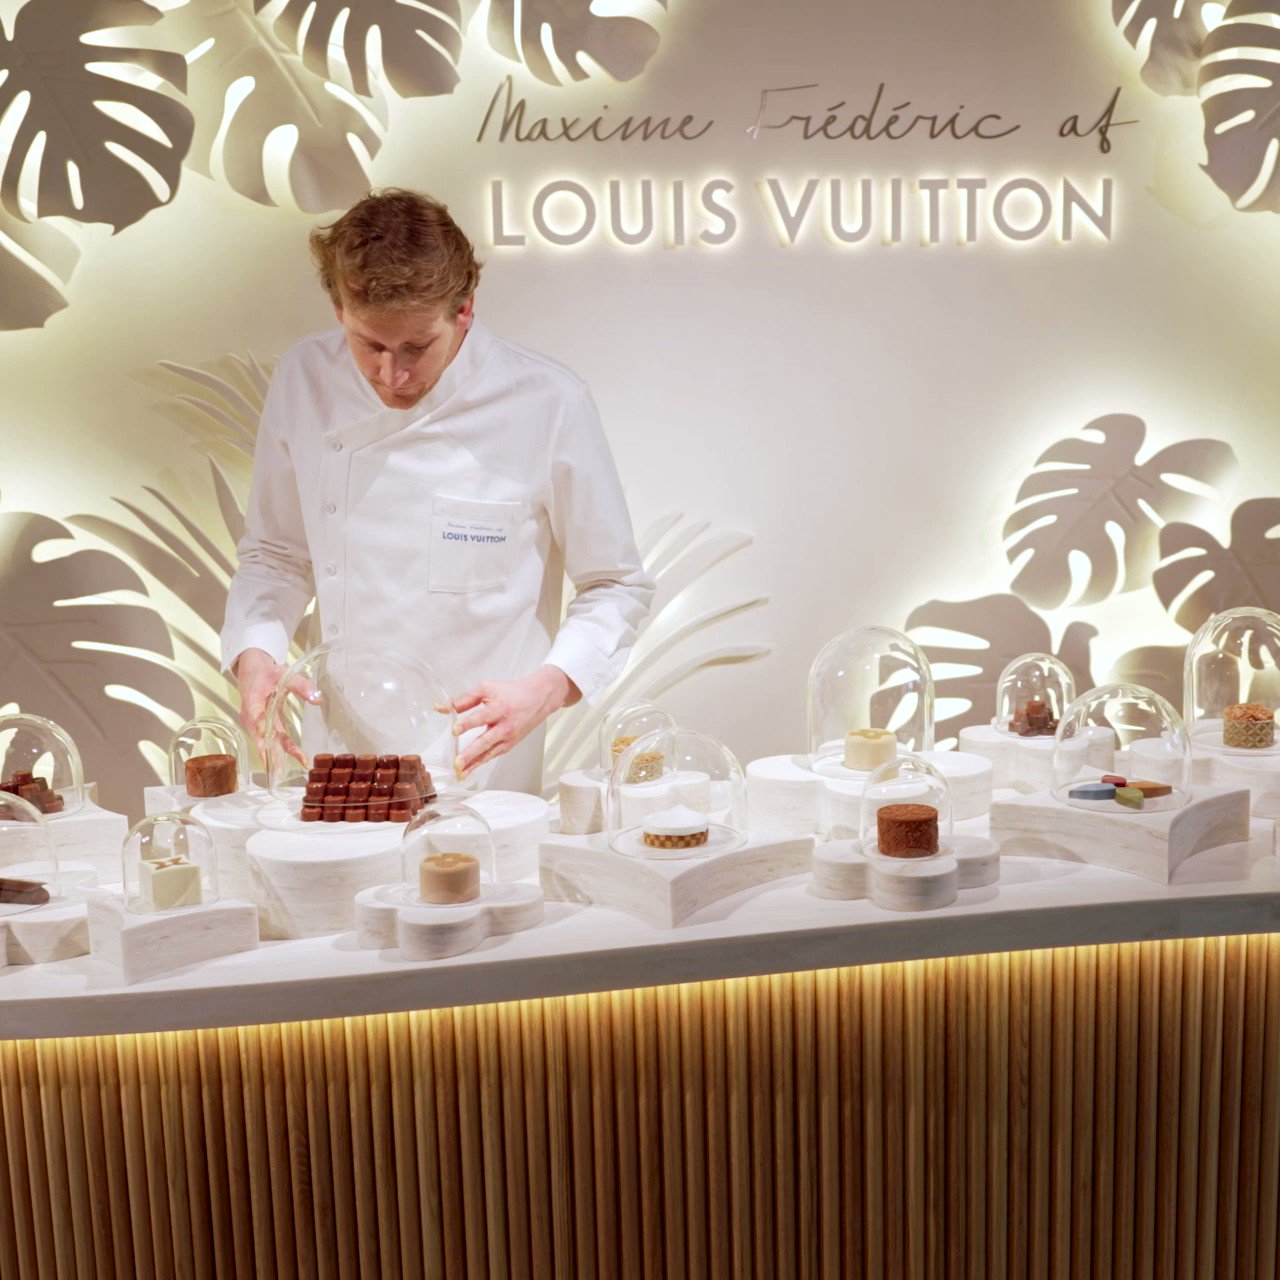 Louis Vuitton and renowned Pastry Chef Maxime Frédéric of Cheval